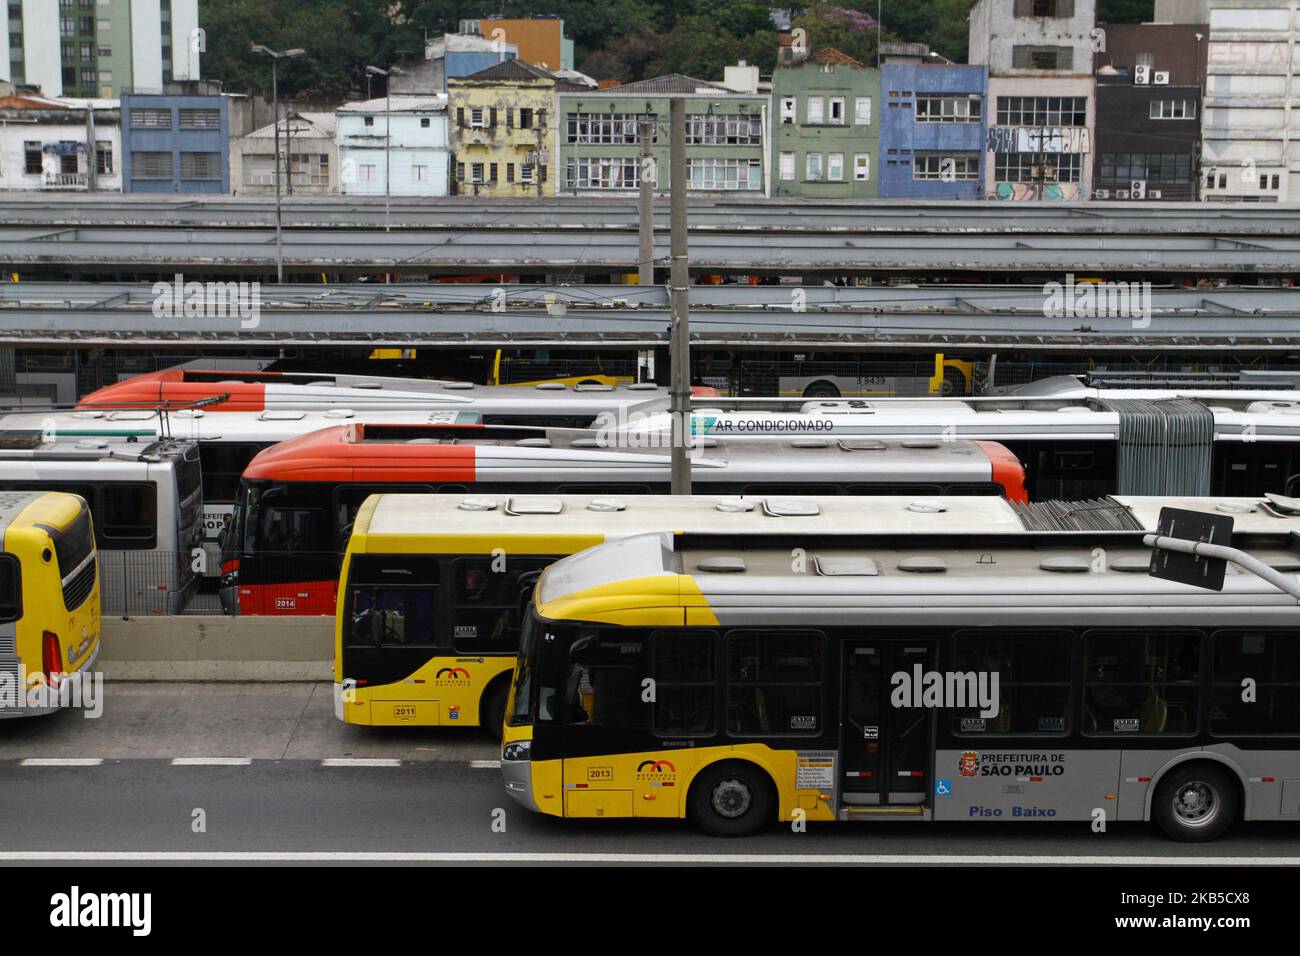 Bus drivers and bus collectors - Bus drivers and collectors strike in the city of Sao Paulo on Friday 6th September 2019. The court ruled that 70% of the fleet circulate to serve the population at peak times. The Sao Paulo Urban Road Transport Drivers and Workers Union has called a general strike of the category today in protest against the reduction of the fleet by Mayor Bruno Covas' management and the maintenance of jobs. According to the union, the city has already removed 450 vehicles from circulation and by the end of the year, another thousand would be removed from the streets. (Photo by Stock Photo